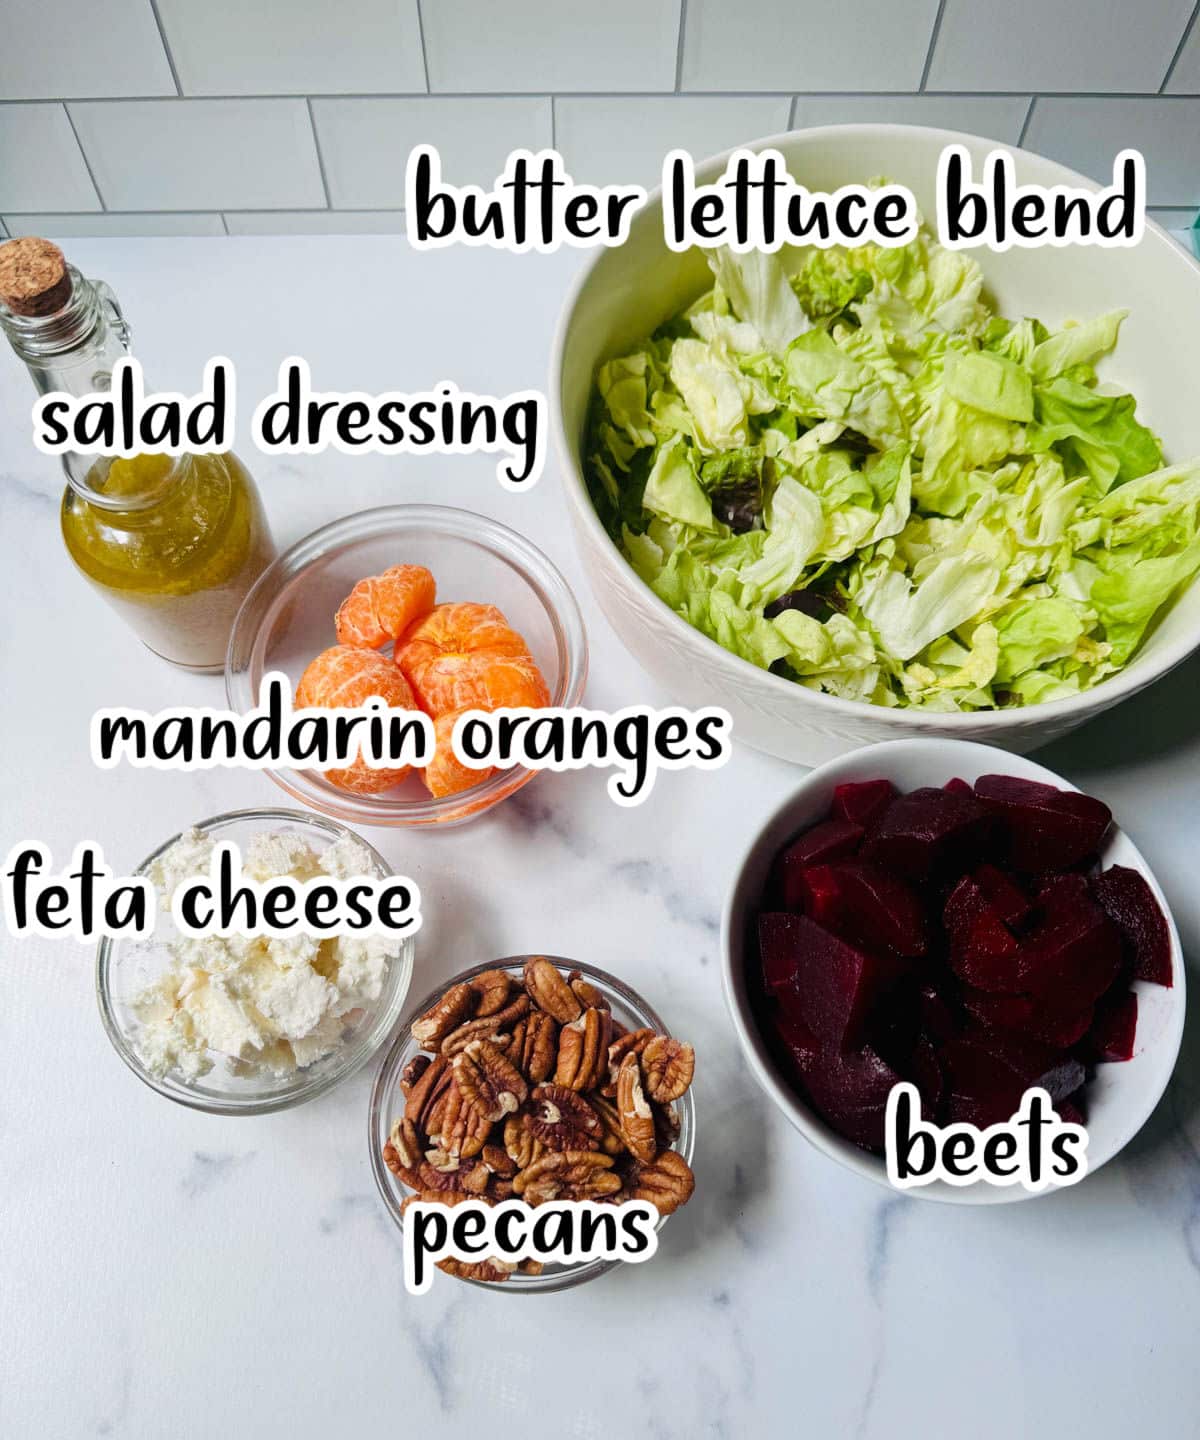 Lettuce, Mandarin orange, salad dressing bottle, beets, feta cheese, and pecans on a white counter top.